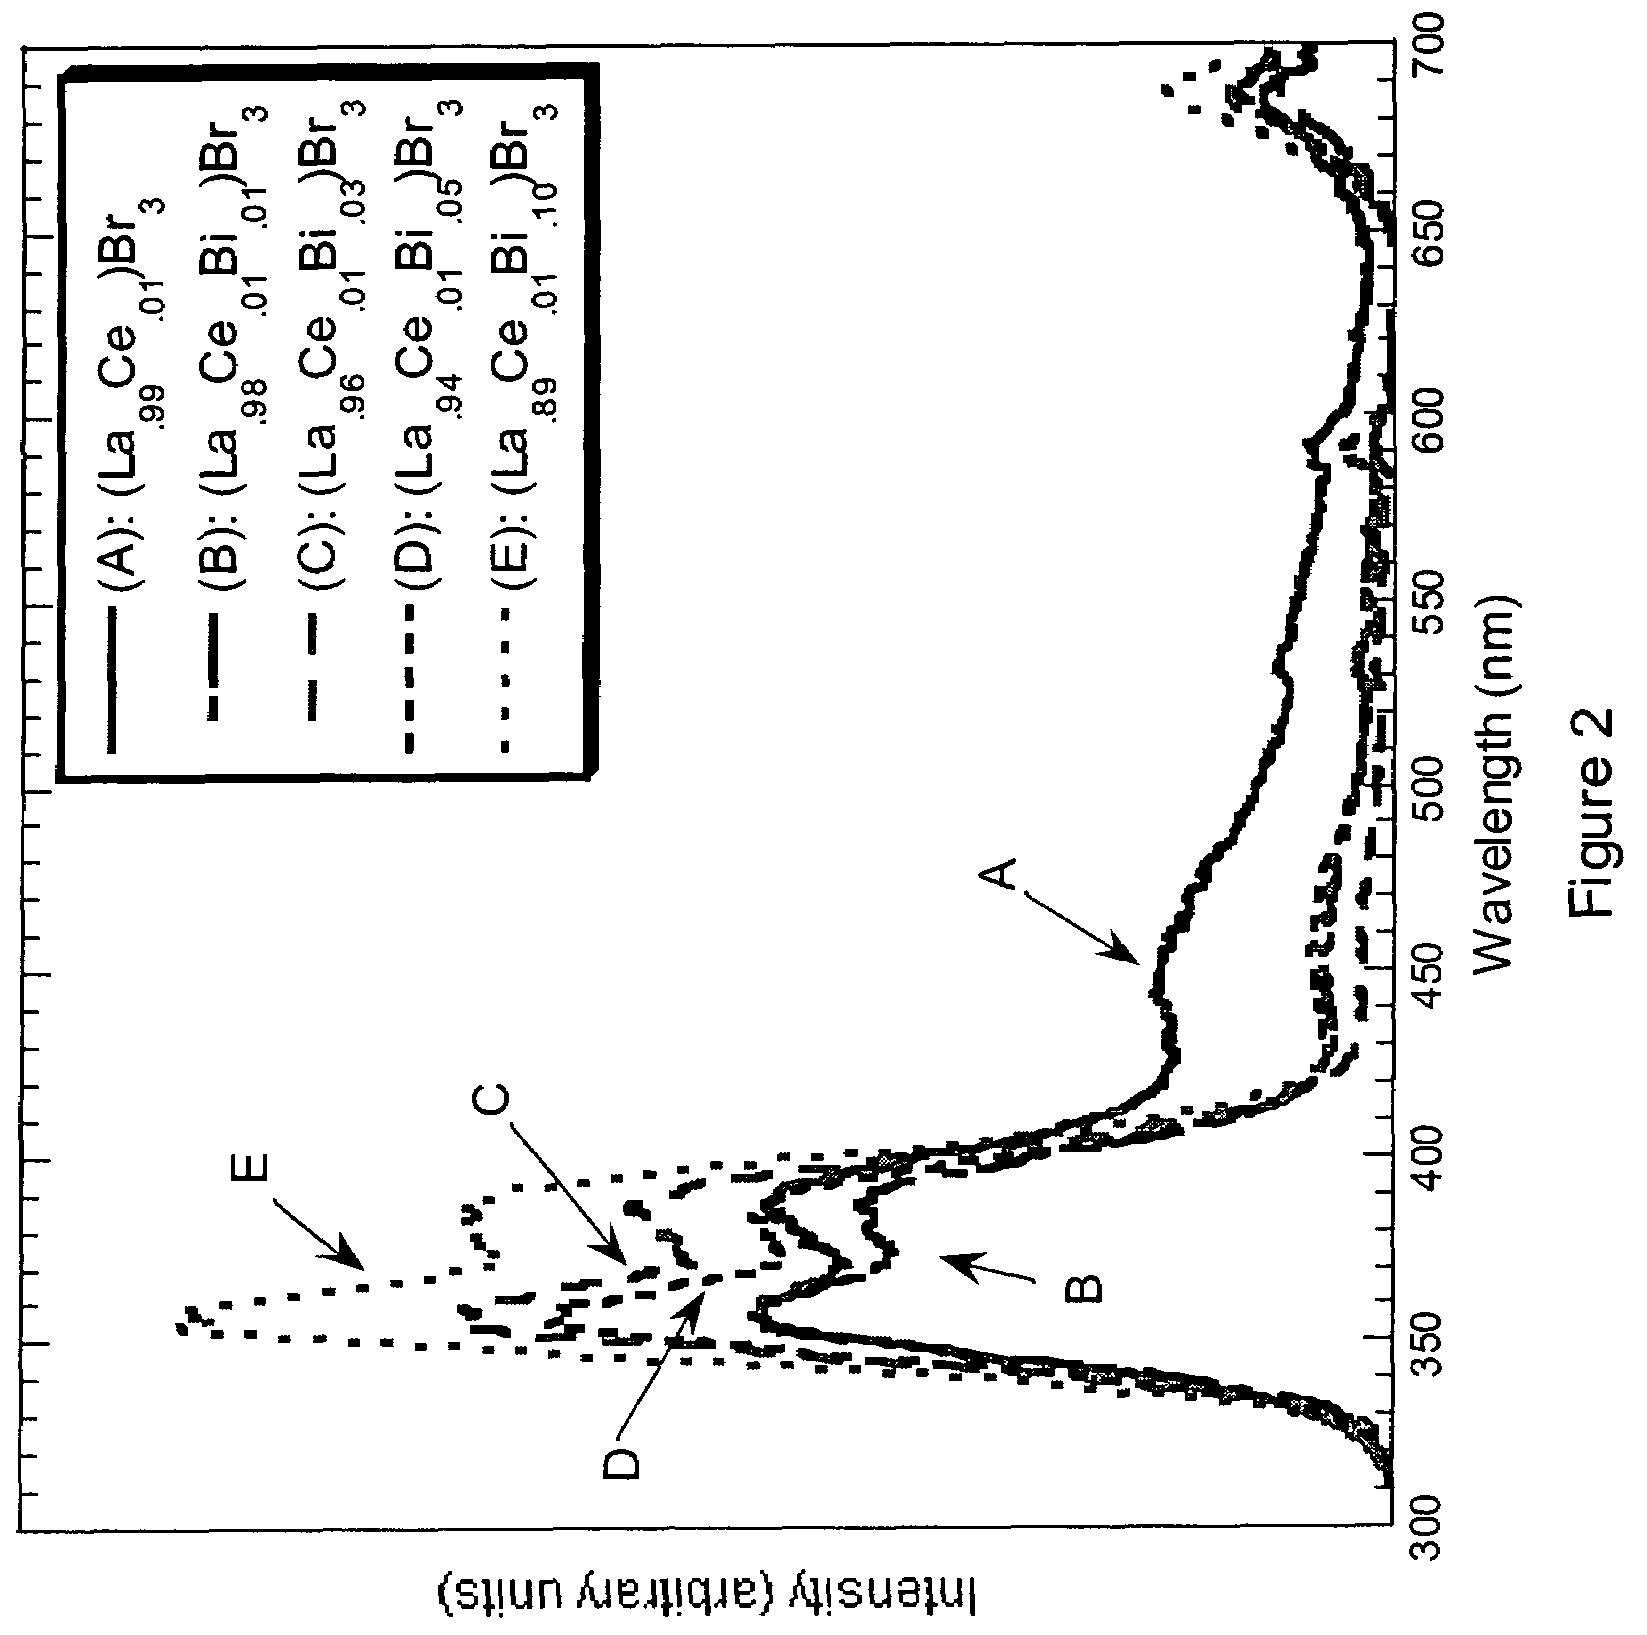 Scintillator compositions, and related processes and articles of manufacture